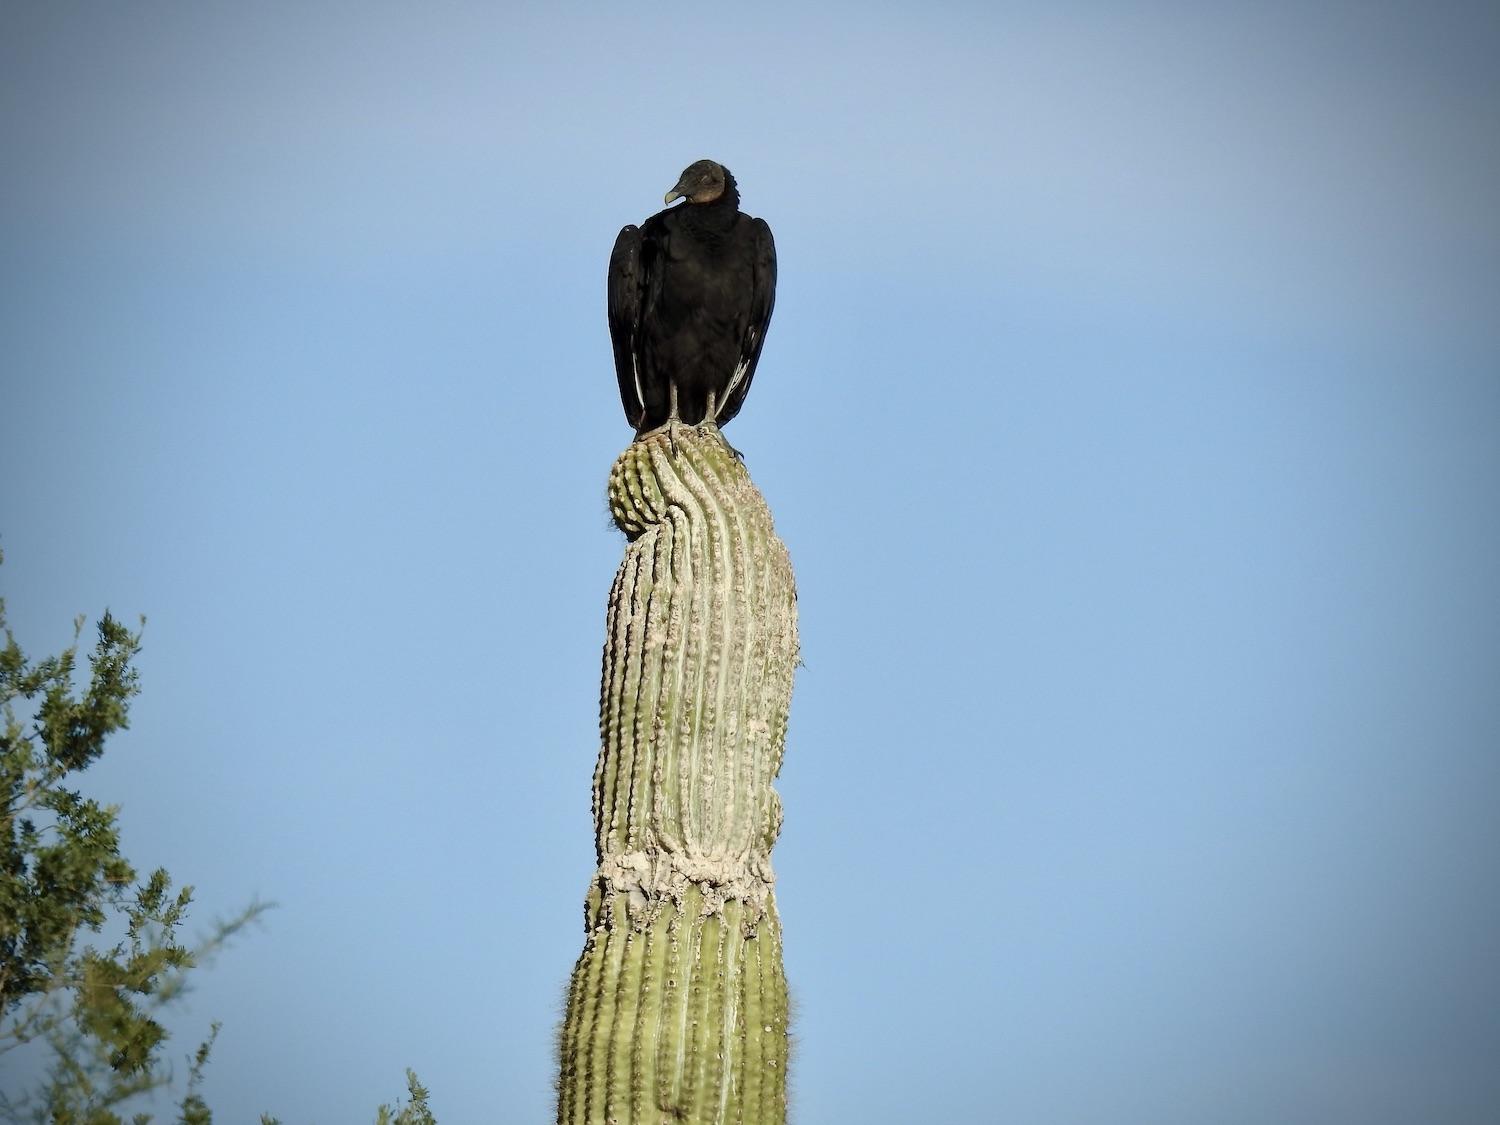 A turkey vulture rests on a saguaro cactus in Organ Pipe Cactus National Monument.